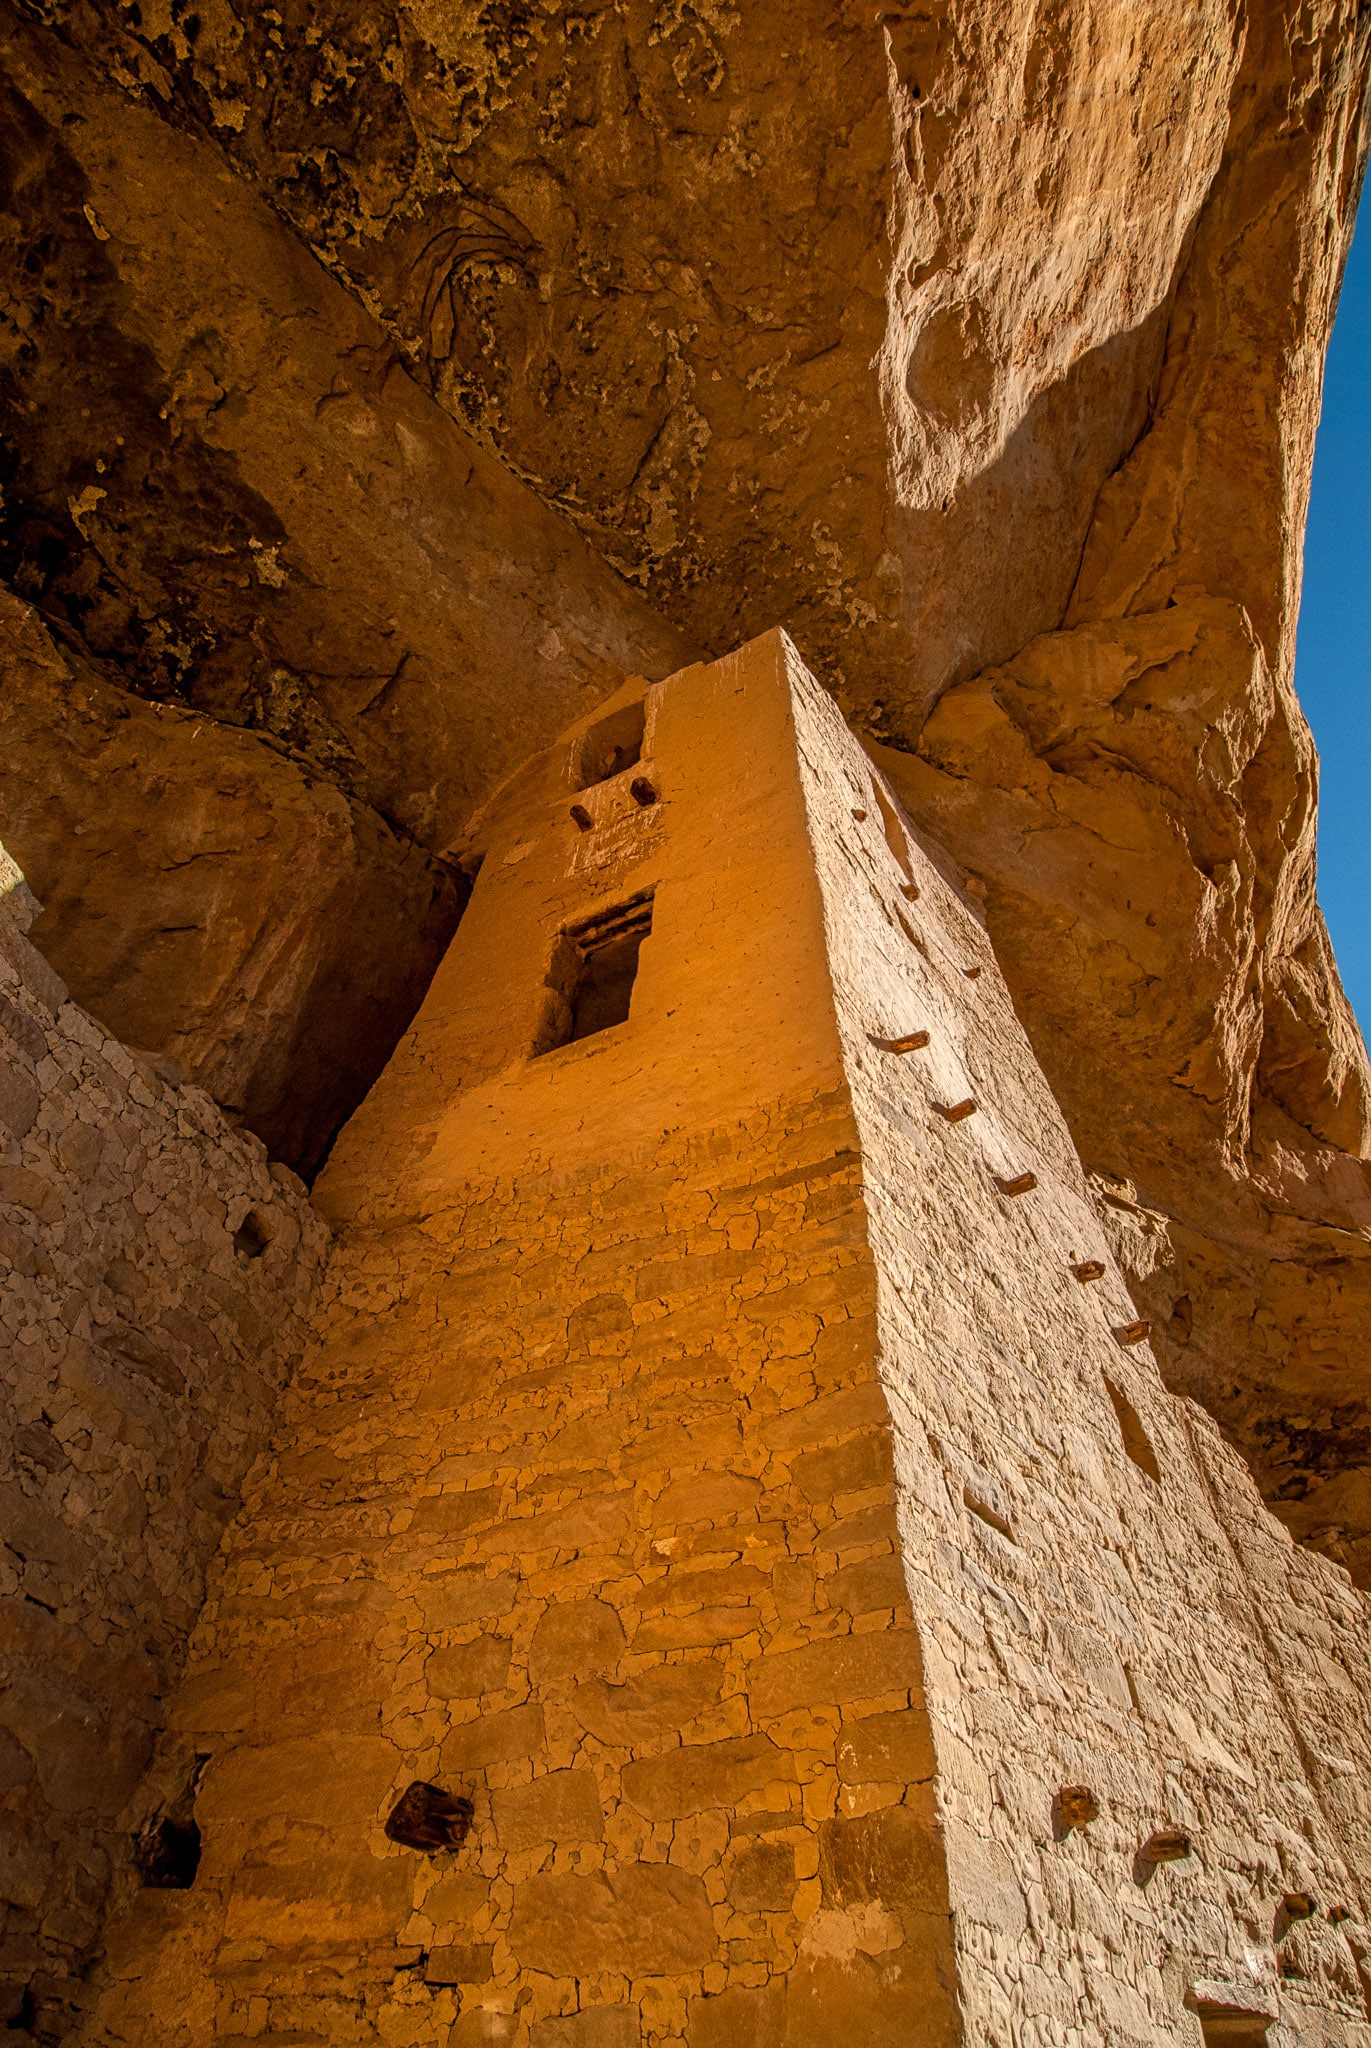 Square tower at south end of Cliff Palace ruins in Mesa Verde National Park near Durango and Cortez, Colorado.